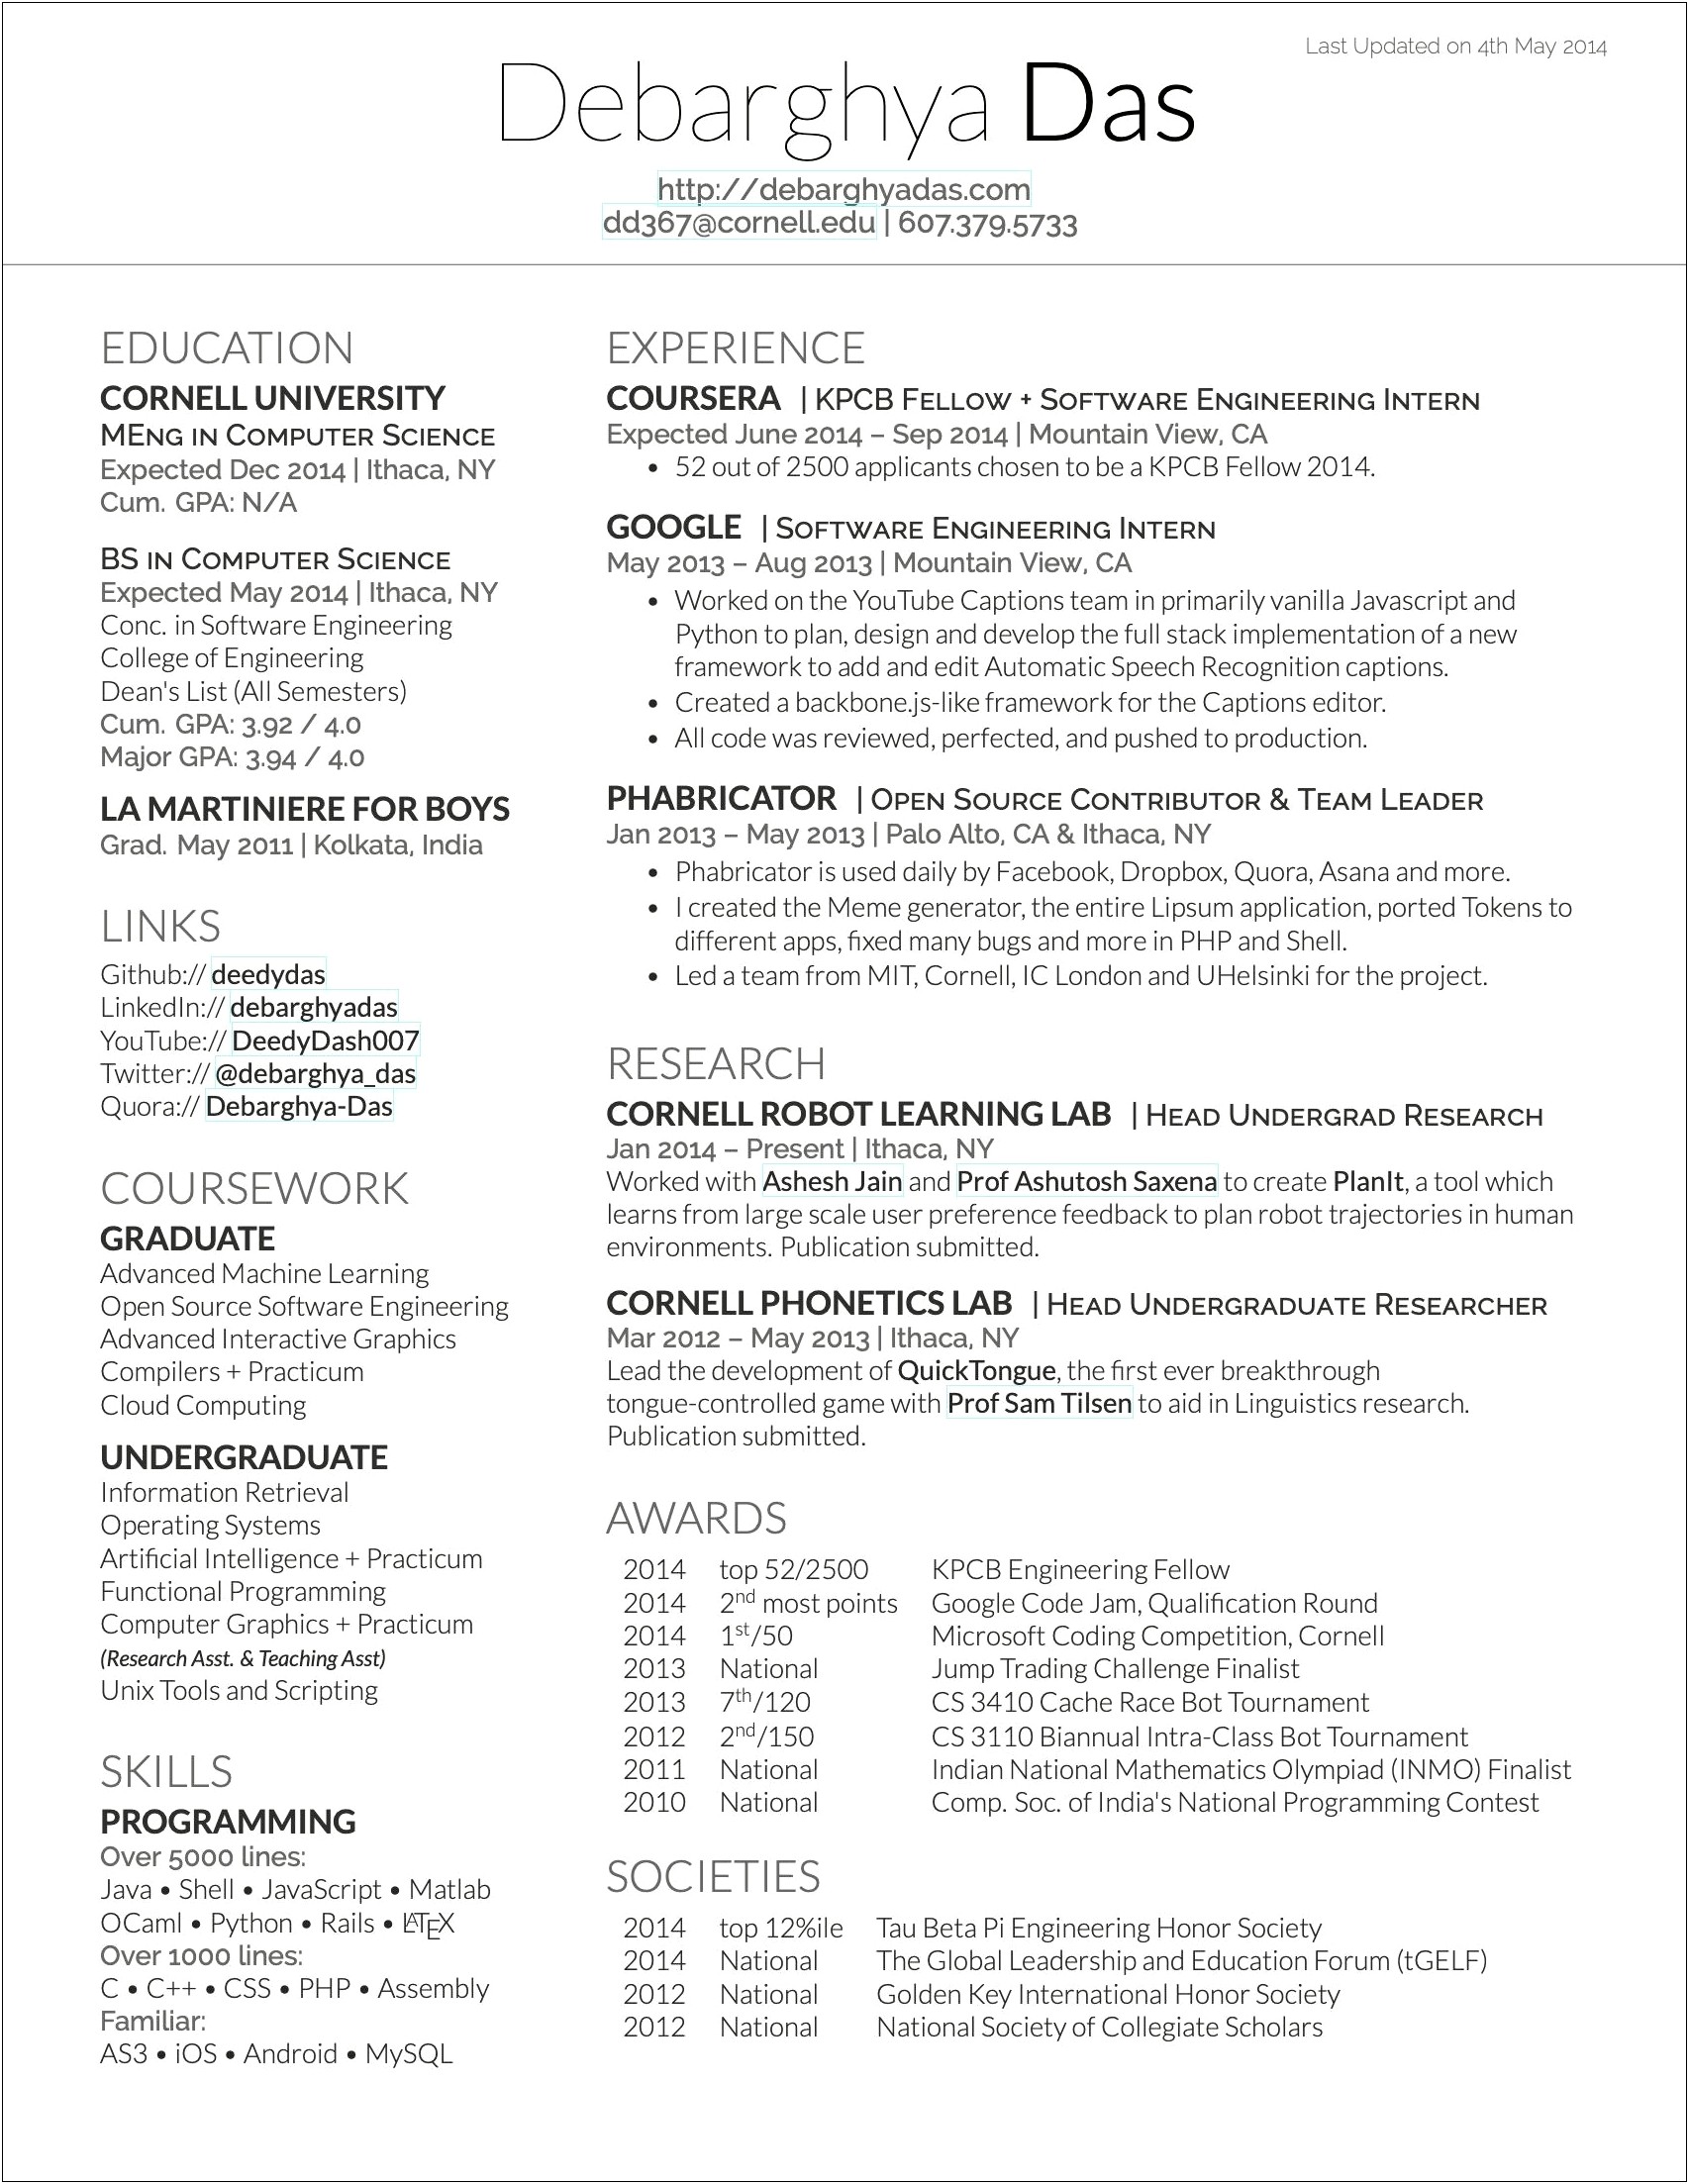 Resume With Only Work Experience And Education